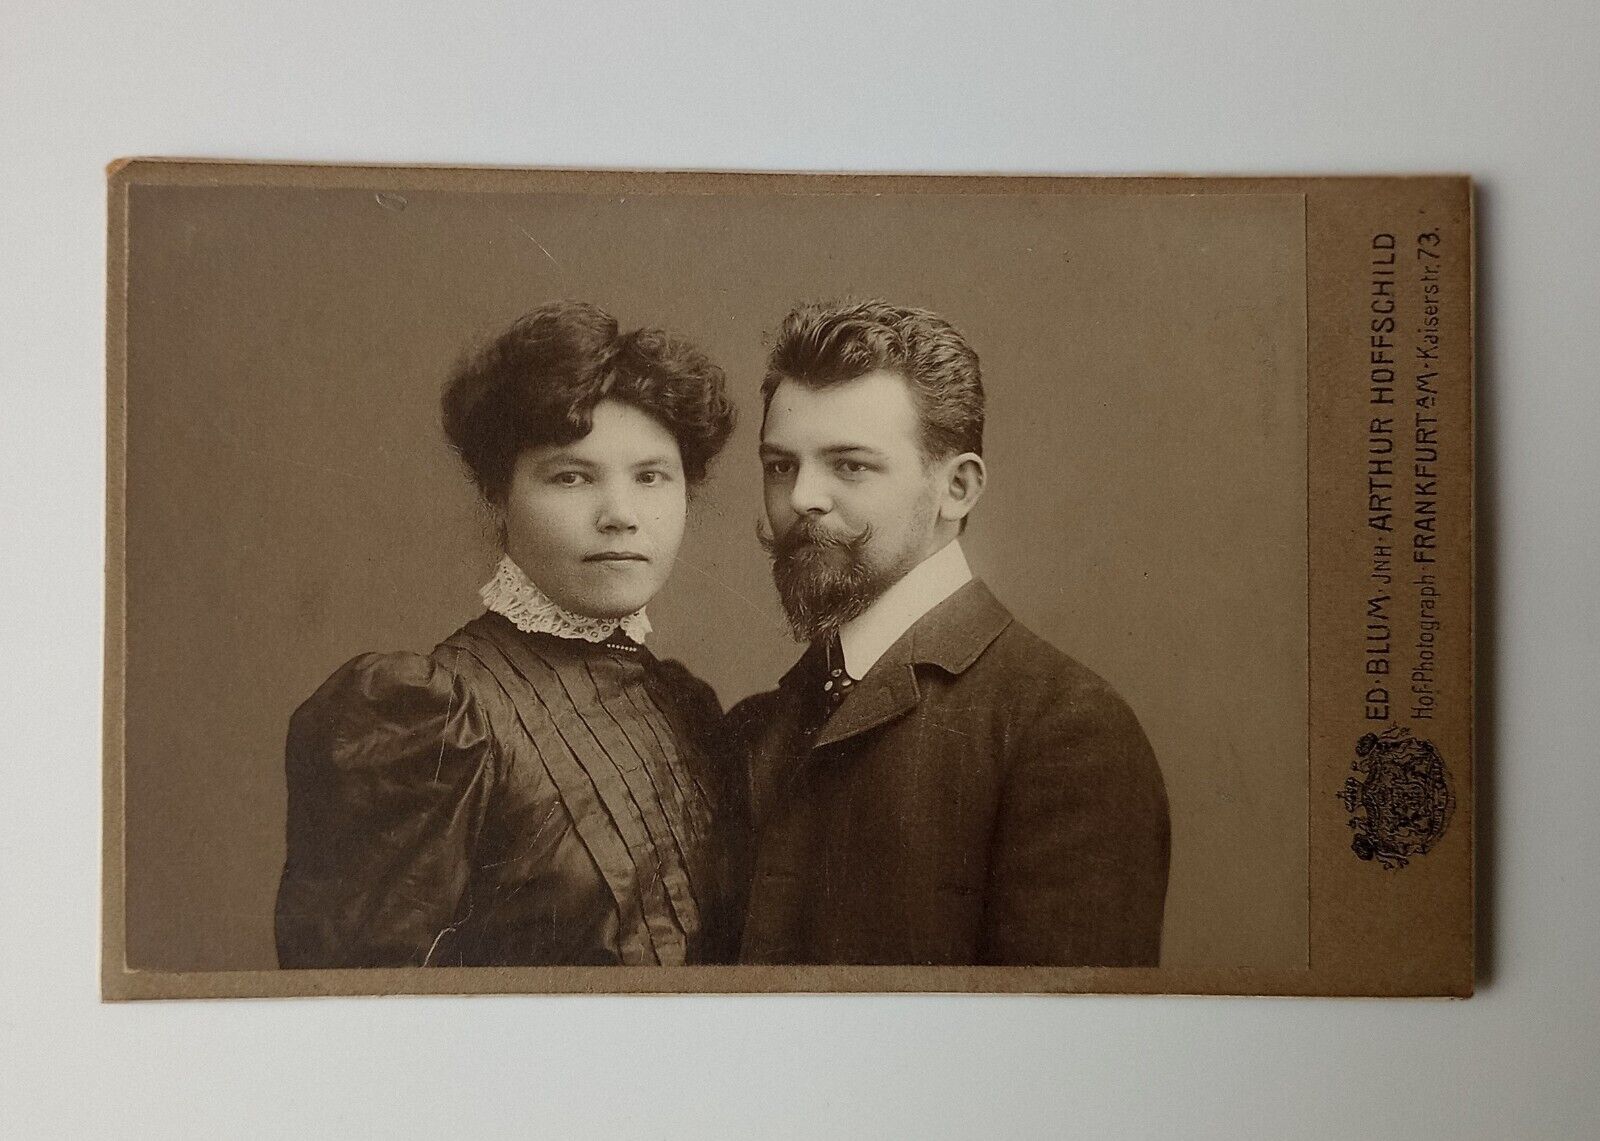 Germany, artistic couple antique photography